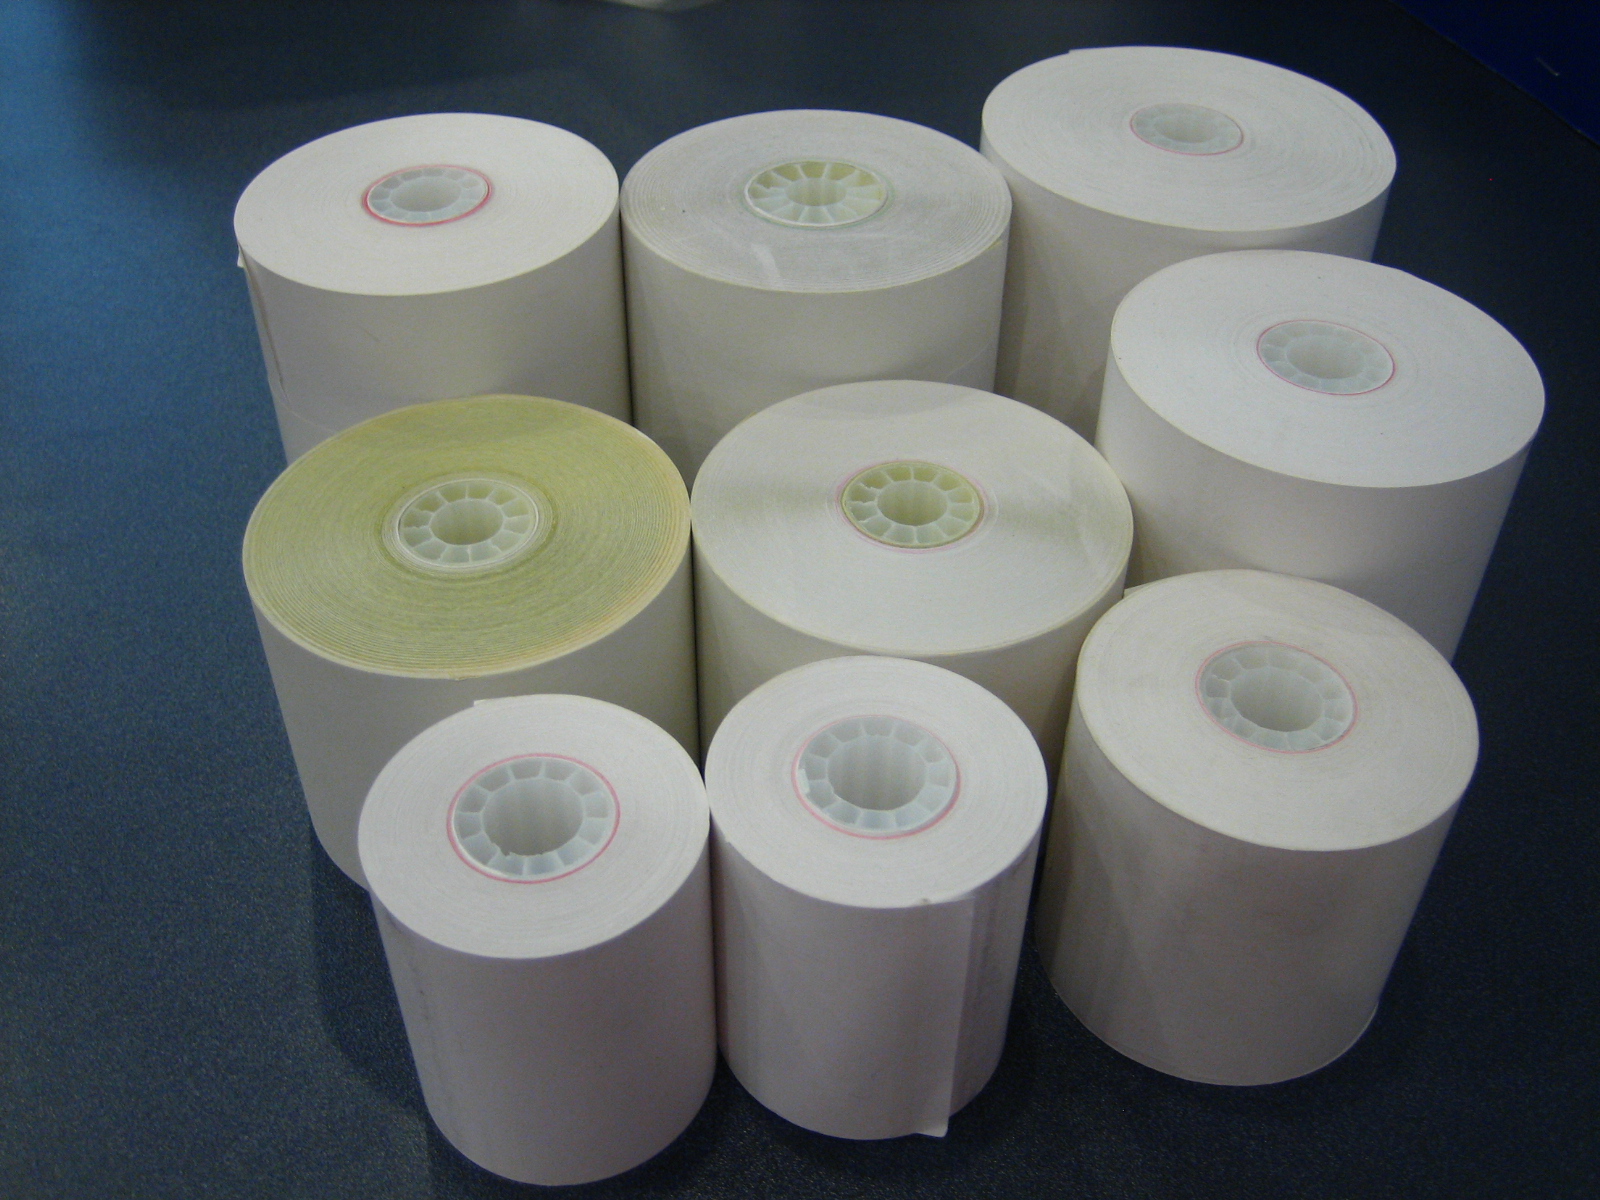 cash register paper rolls and thermal paper rolls